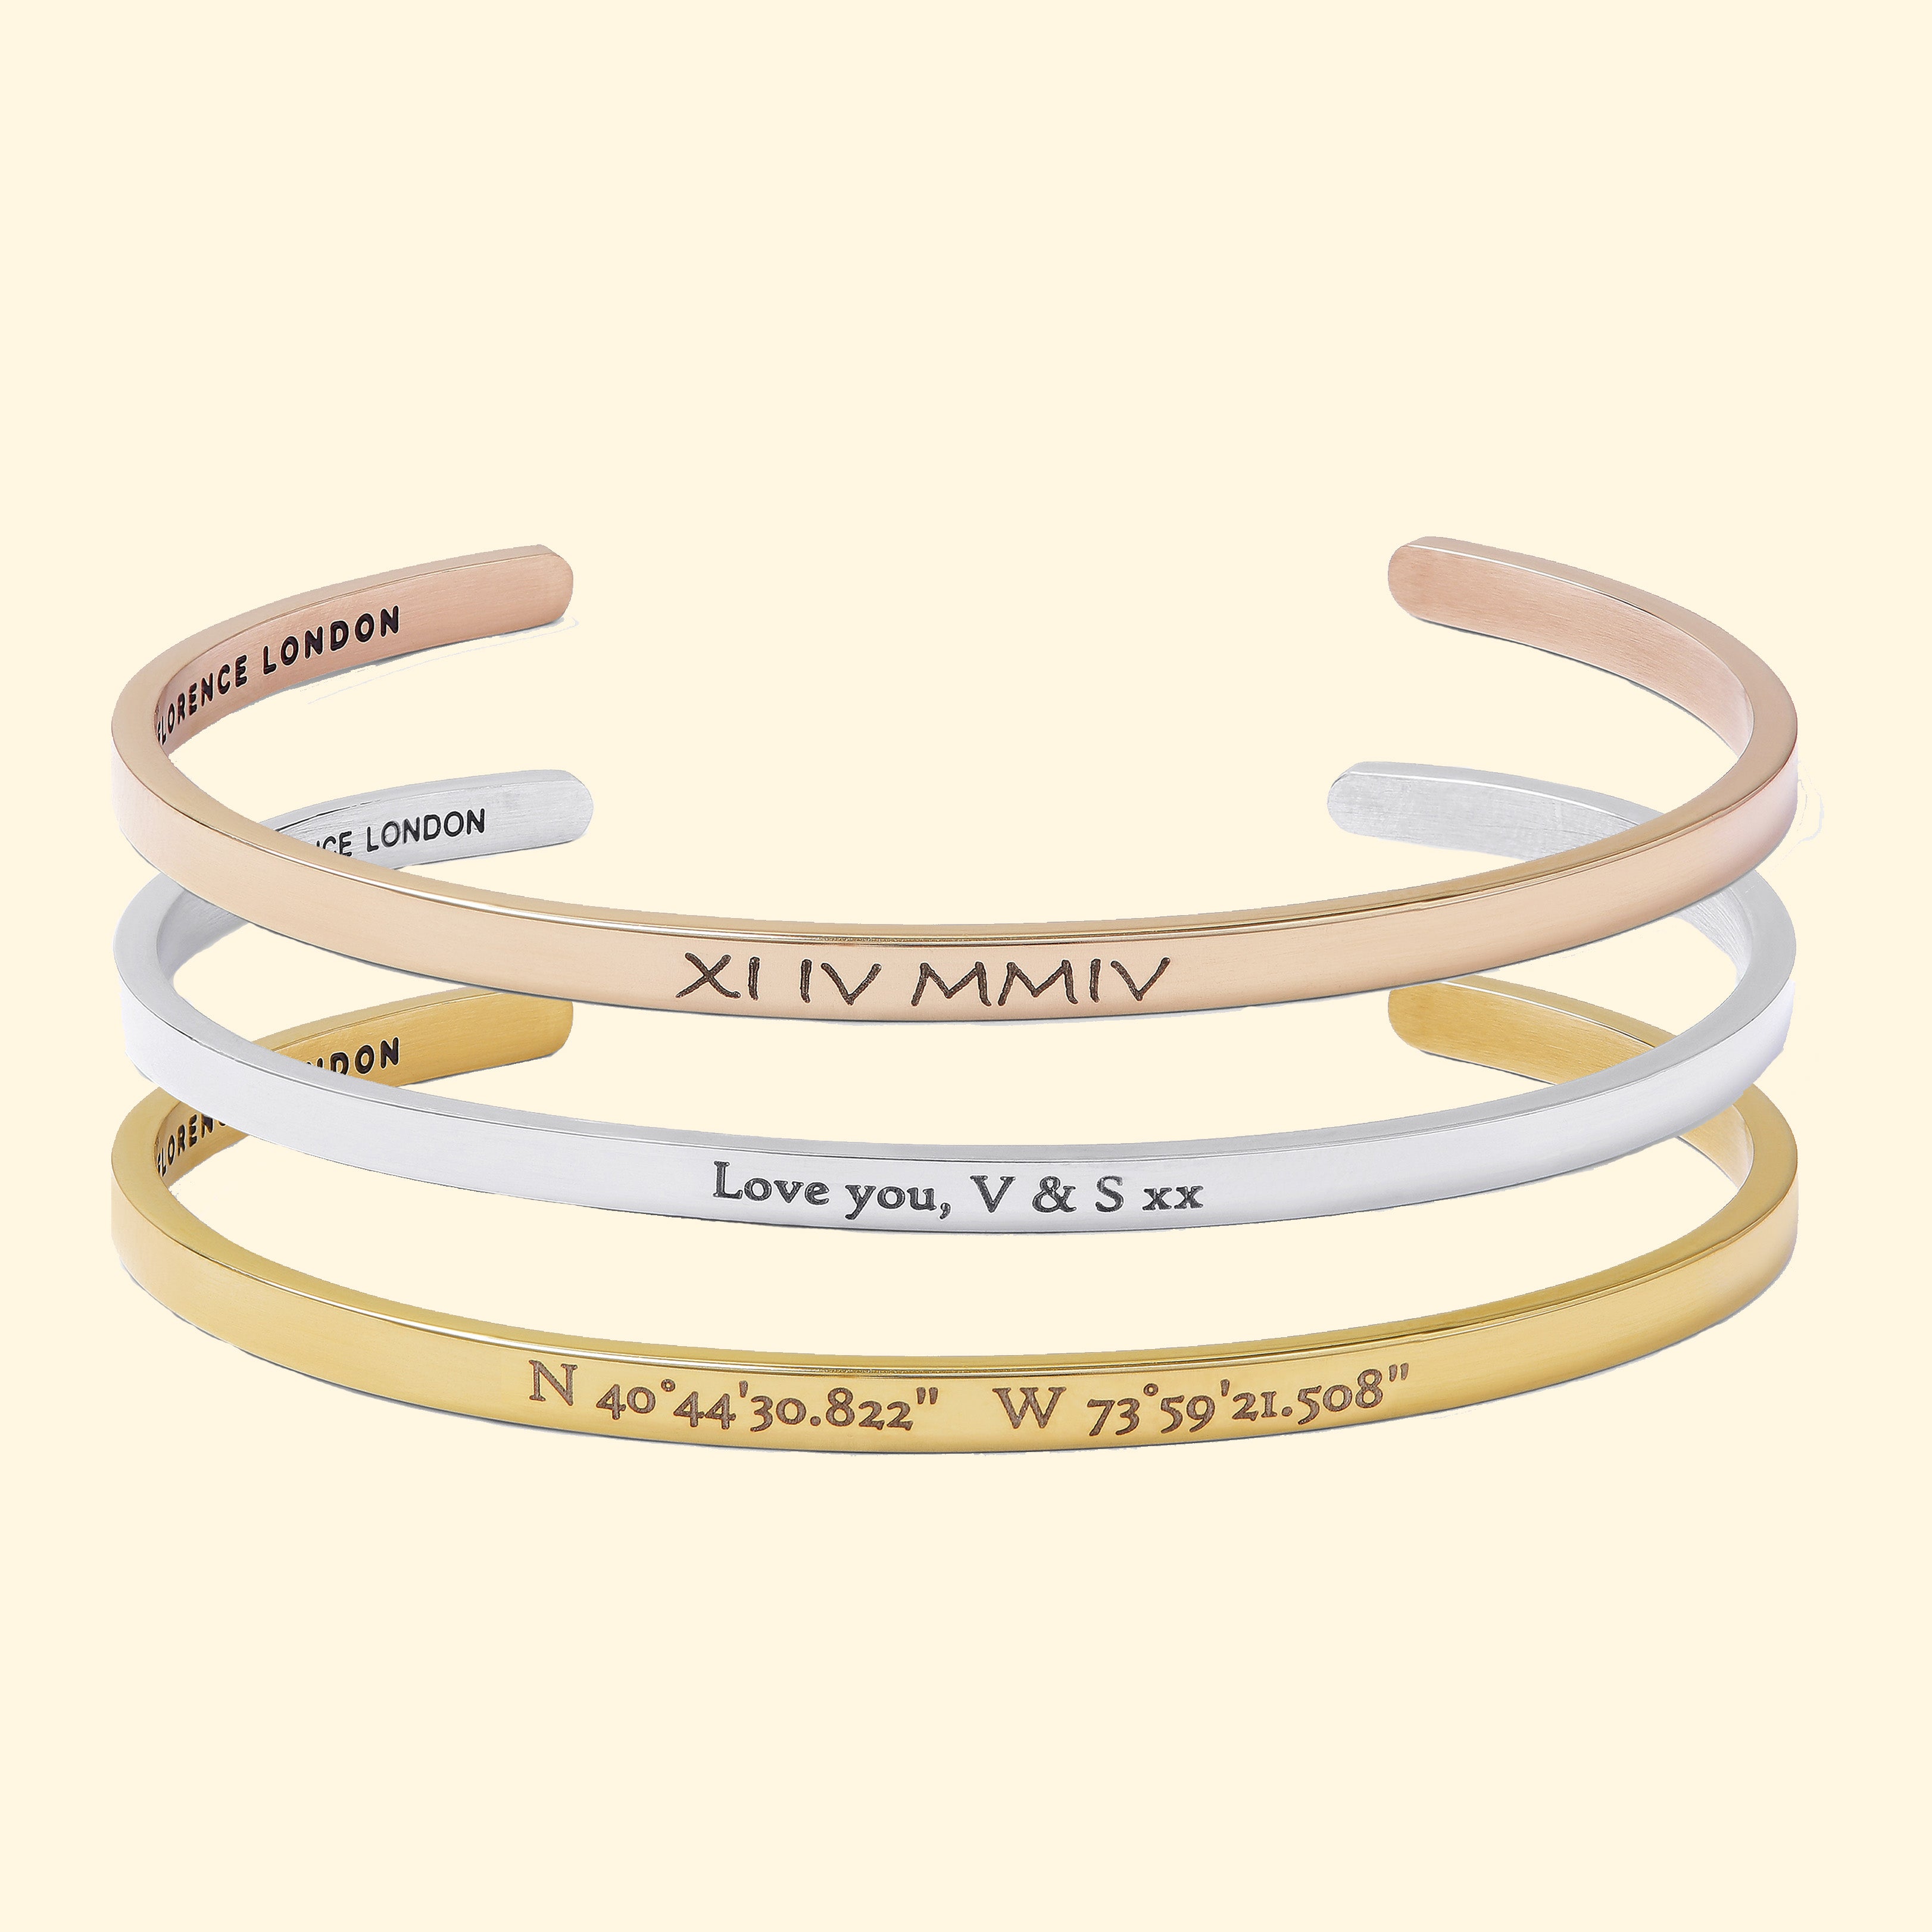 Engraved bracelet with name | Bulbby